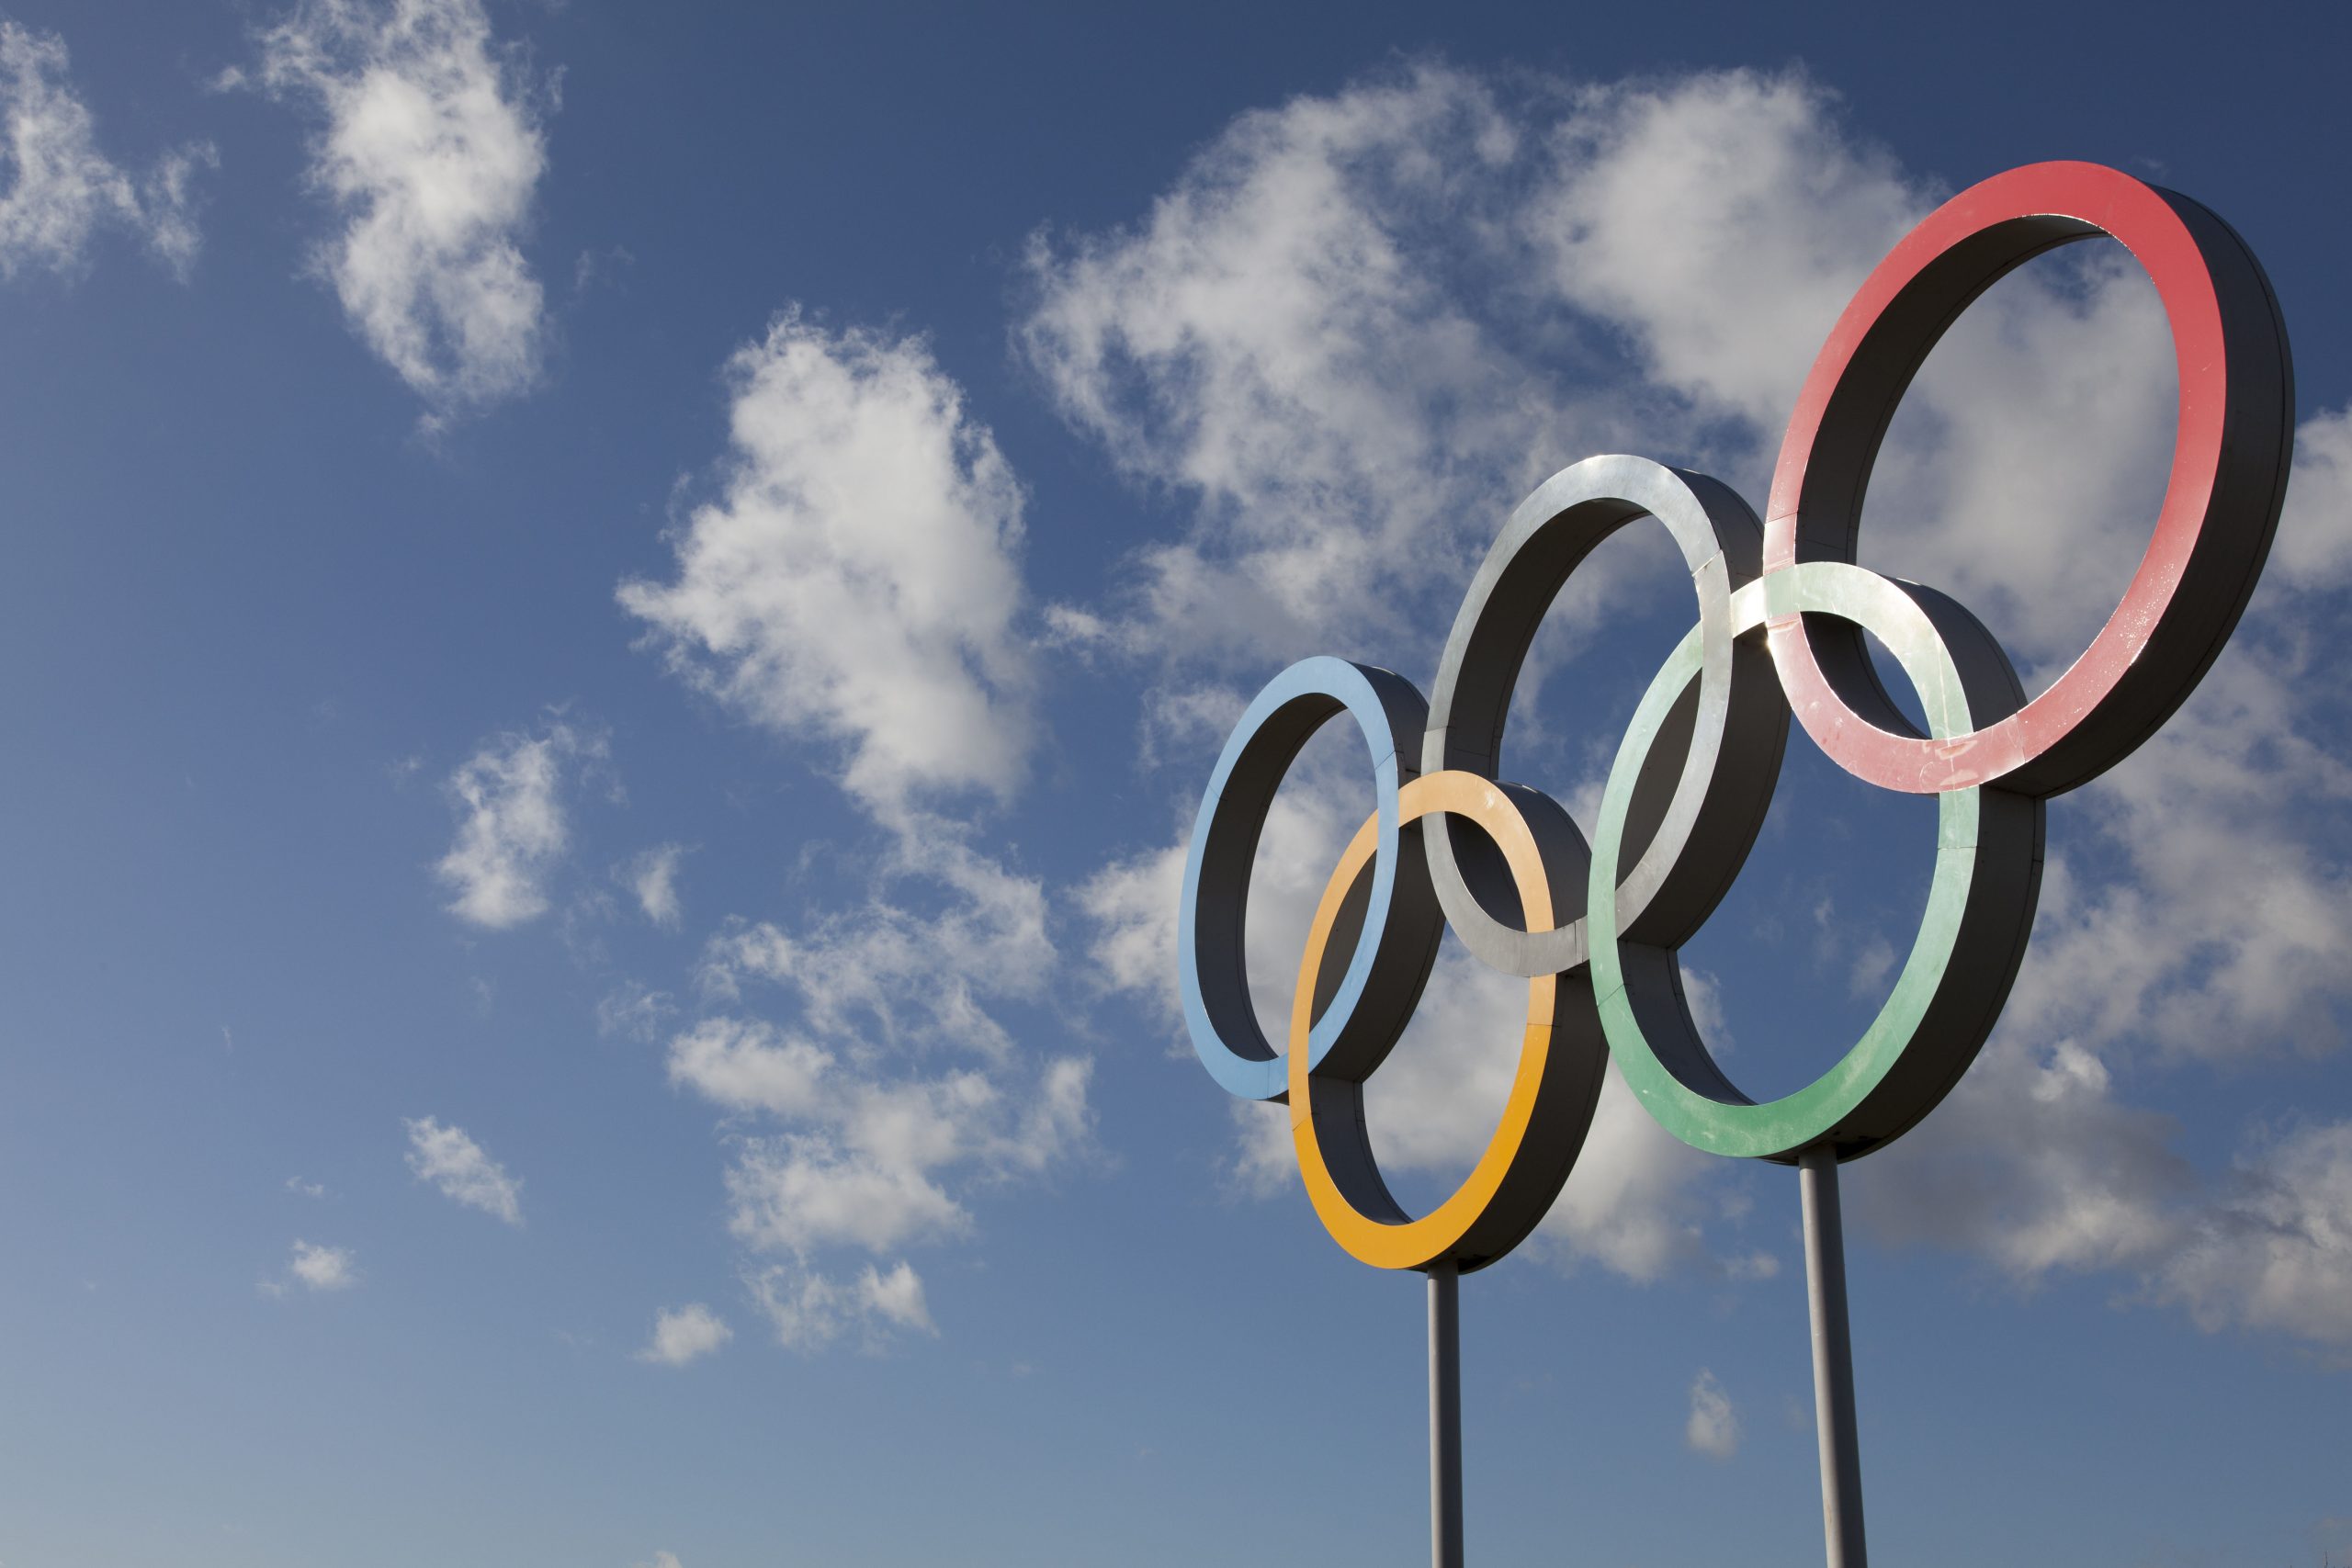 The Olympic symbol, made up of five interconnected coloured rings, under a blue sky.